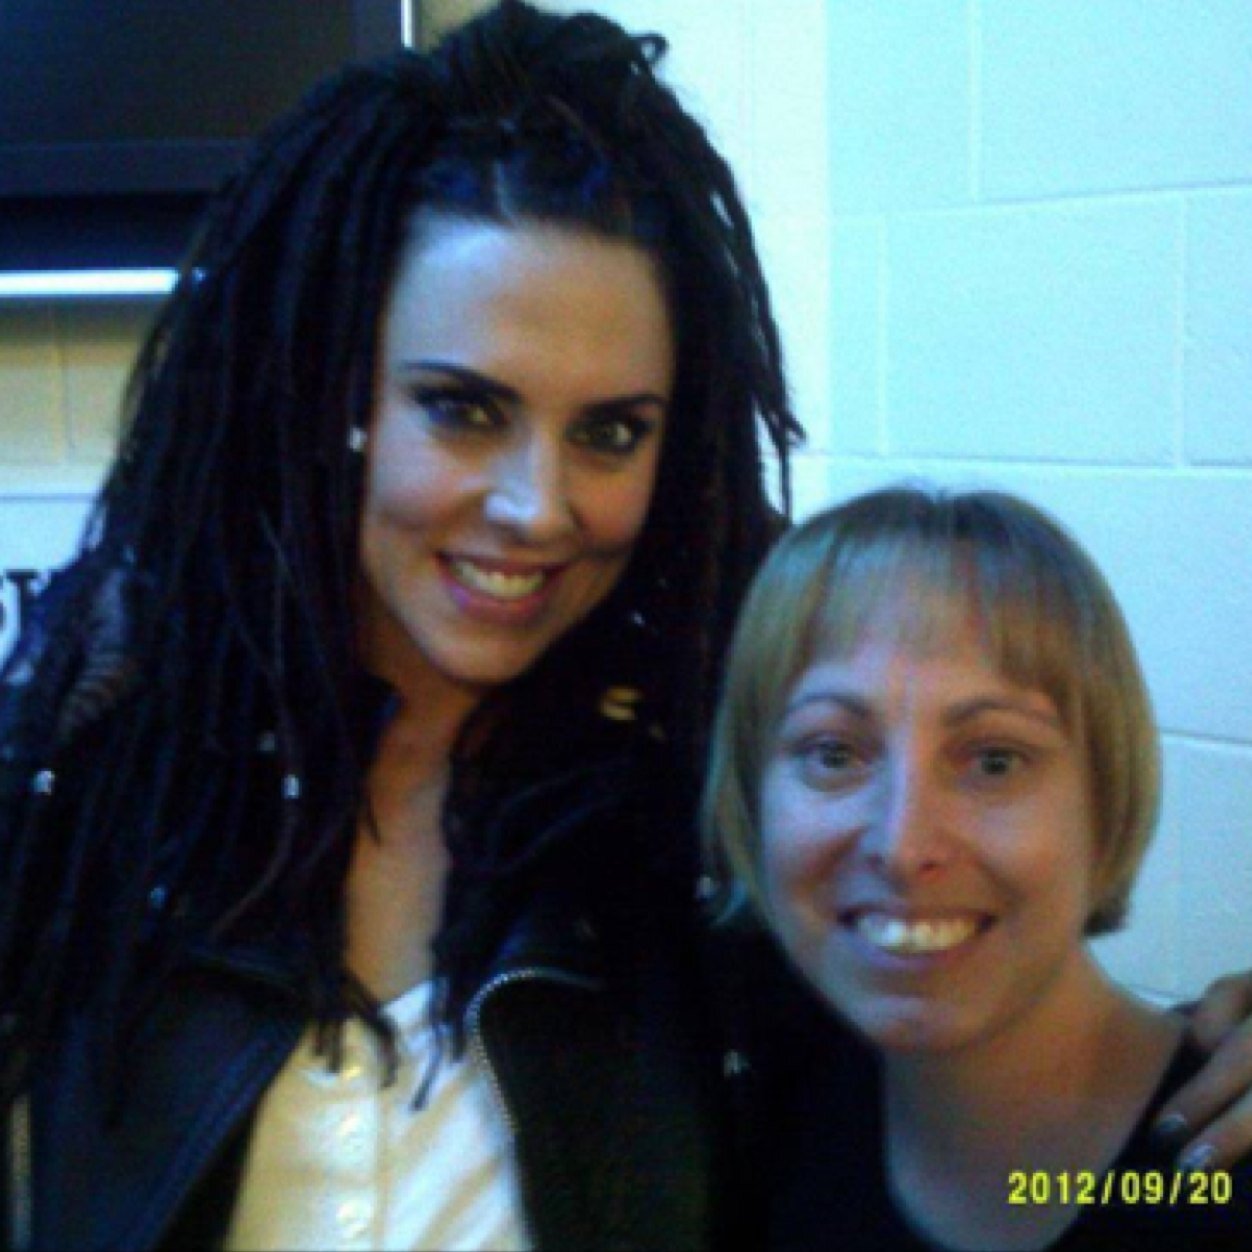 Hello im Nikki and im a huge fan of  Mel C she is my idol and always will be, Mel C rules forever!!!!!